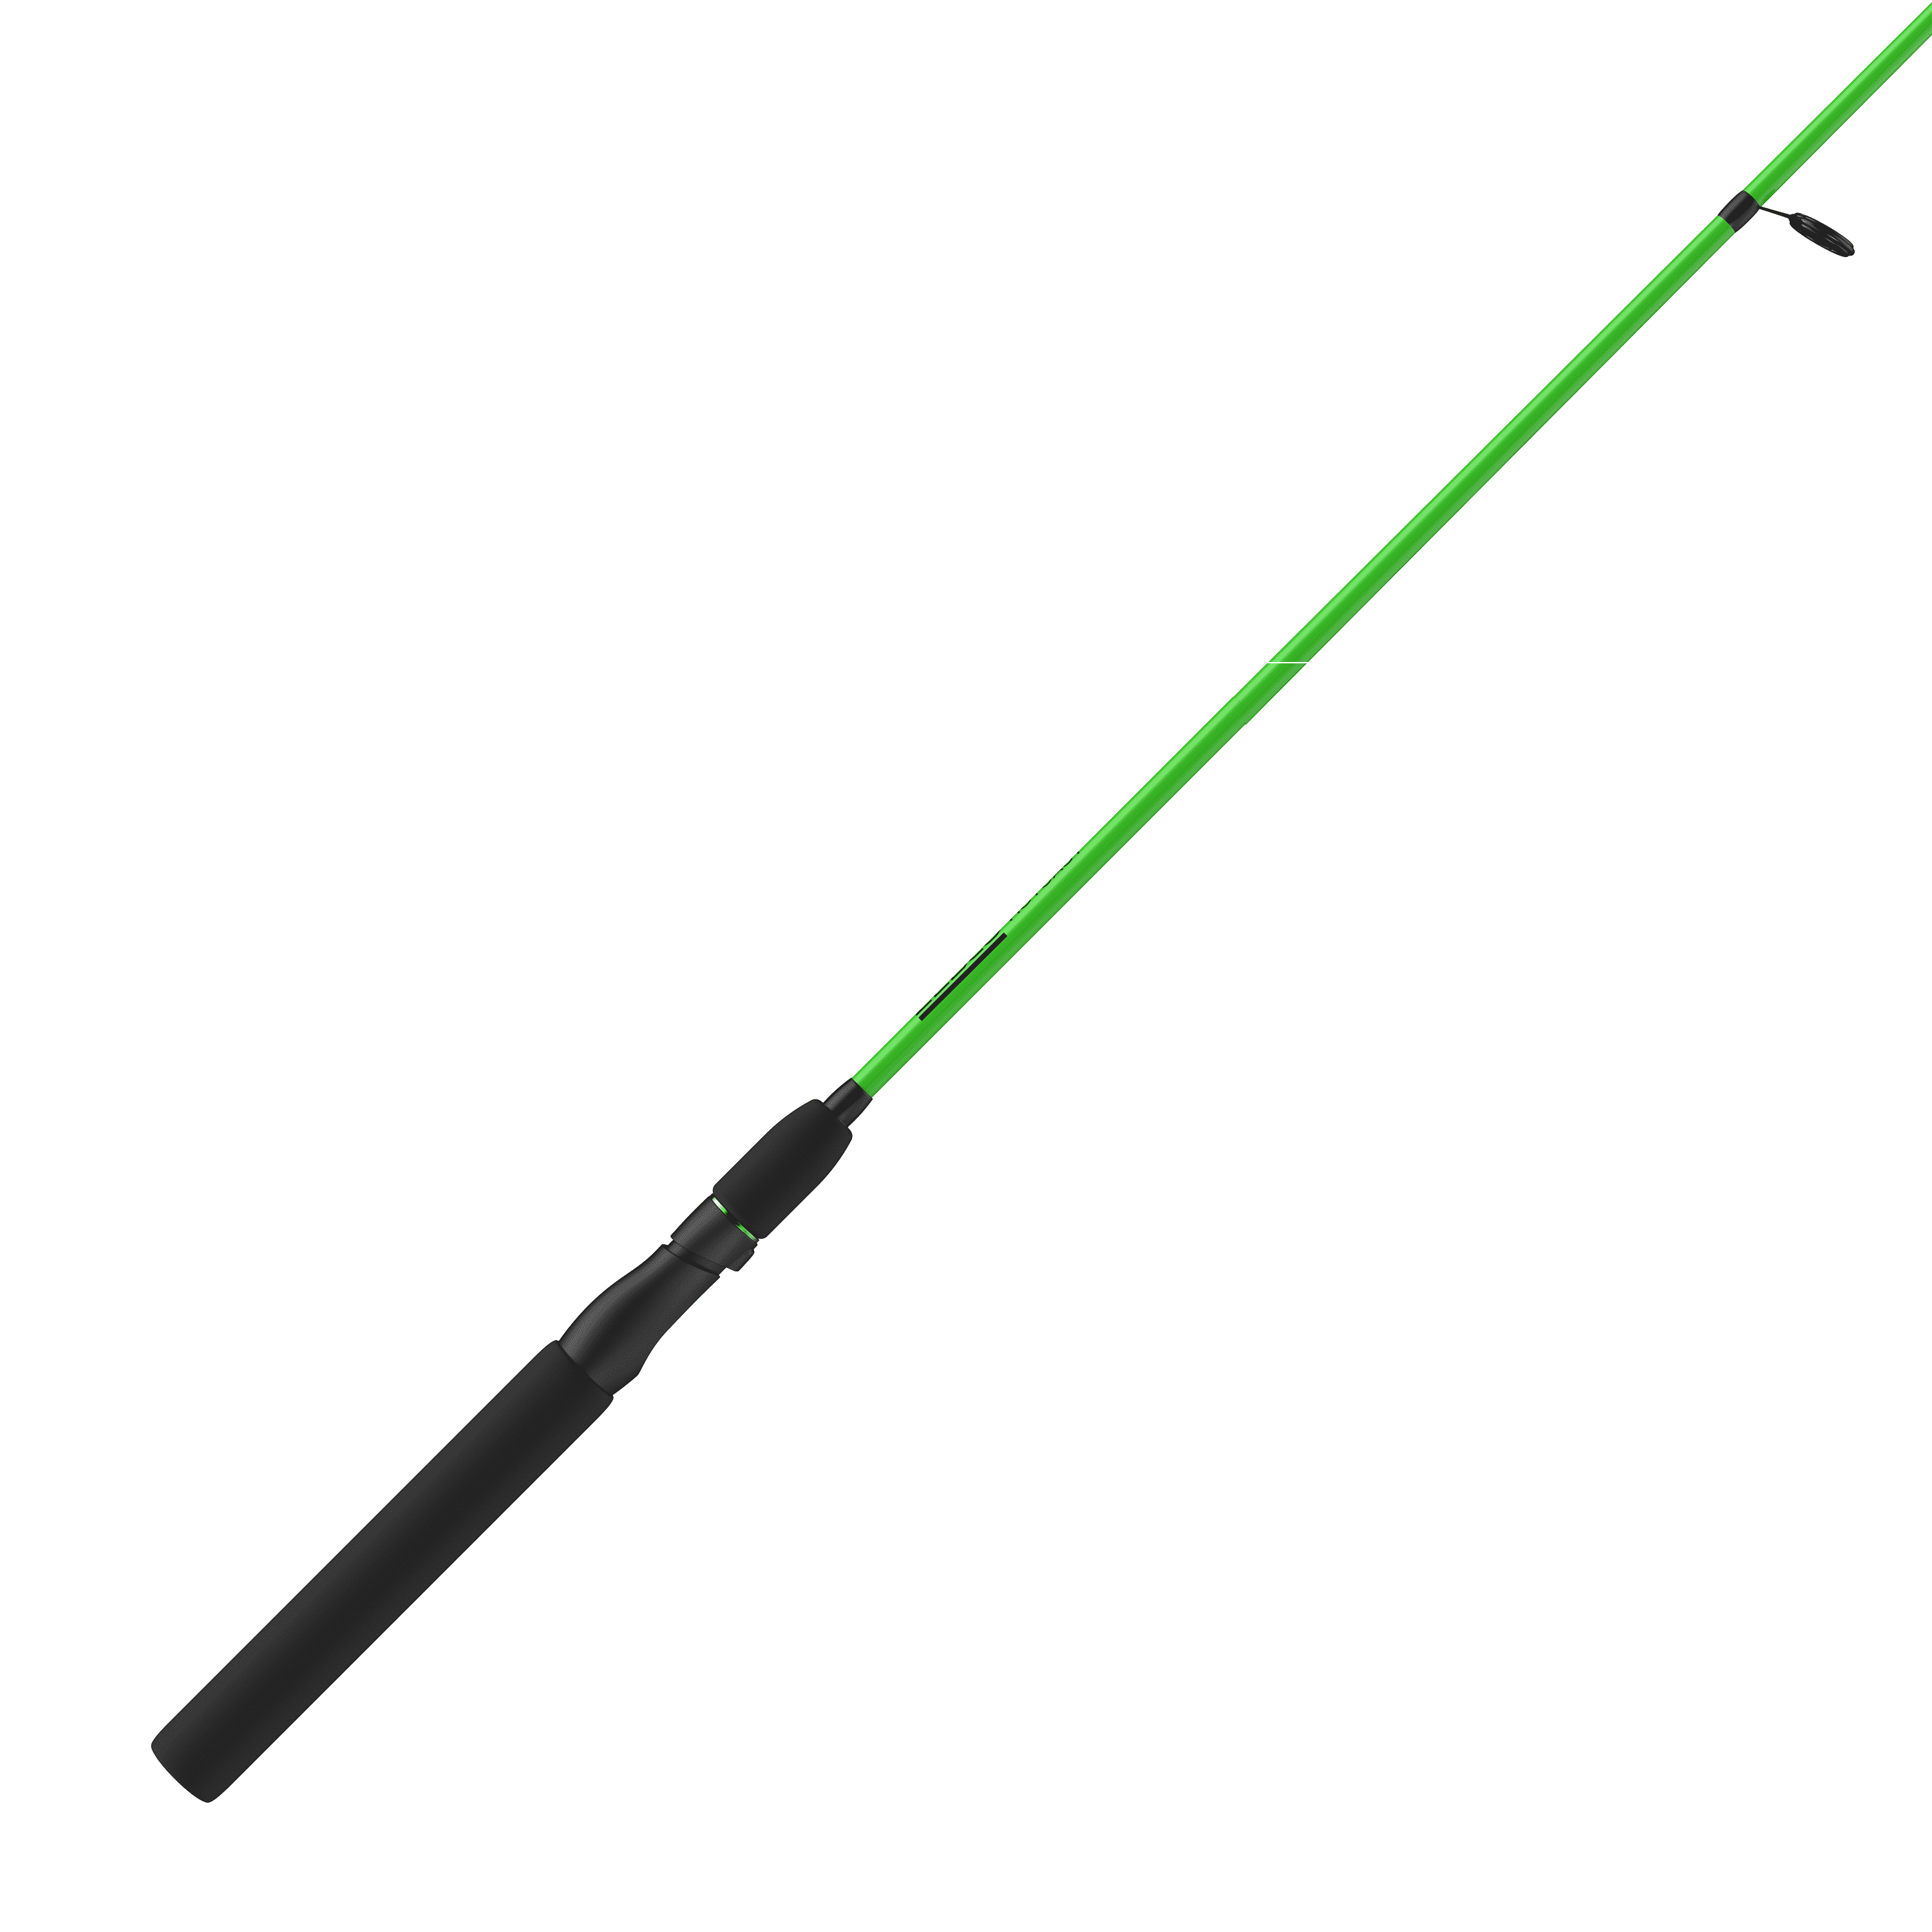 Zebco Hotcast Spinning Rod, Durable Fiberglass Fishing Pole with Stainless Steel Shock-Ring Guides, 4-Foot 6-Inch 2-Piece Medium-Light Power, Moderate Action and Comfortable EVA Rod Handle, Green